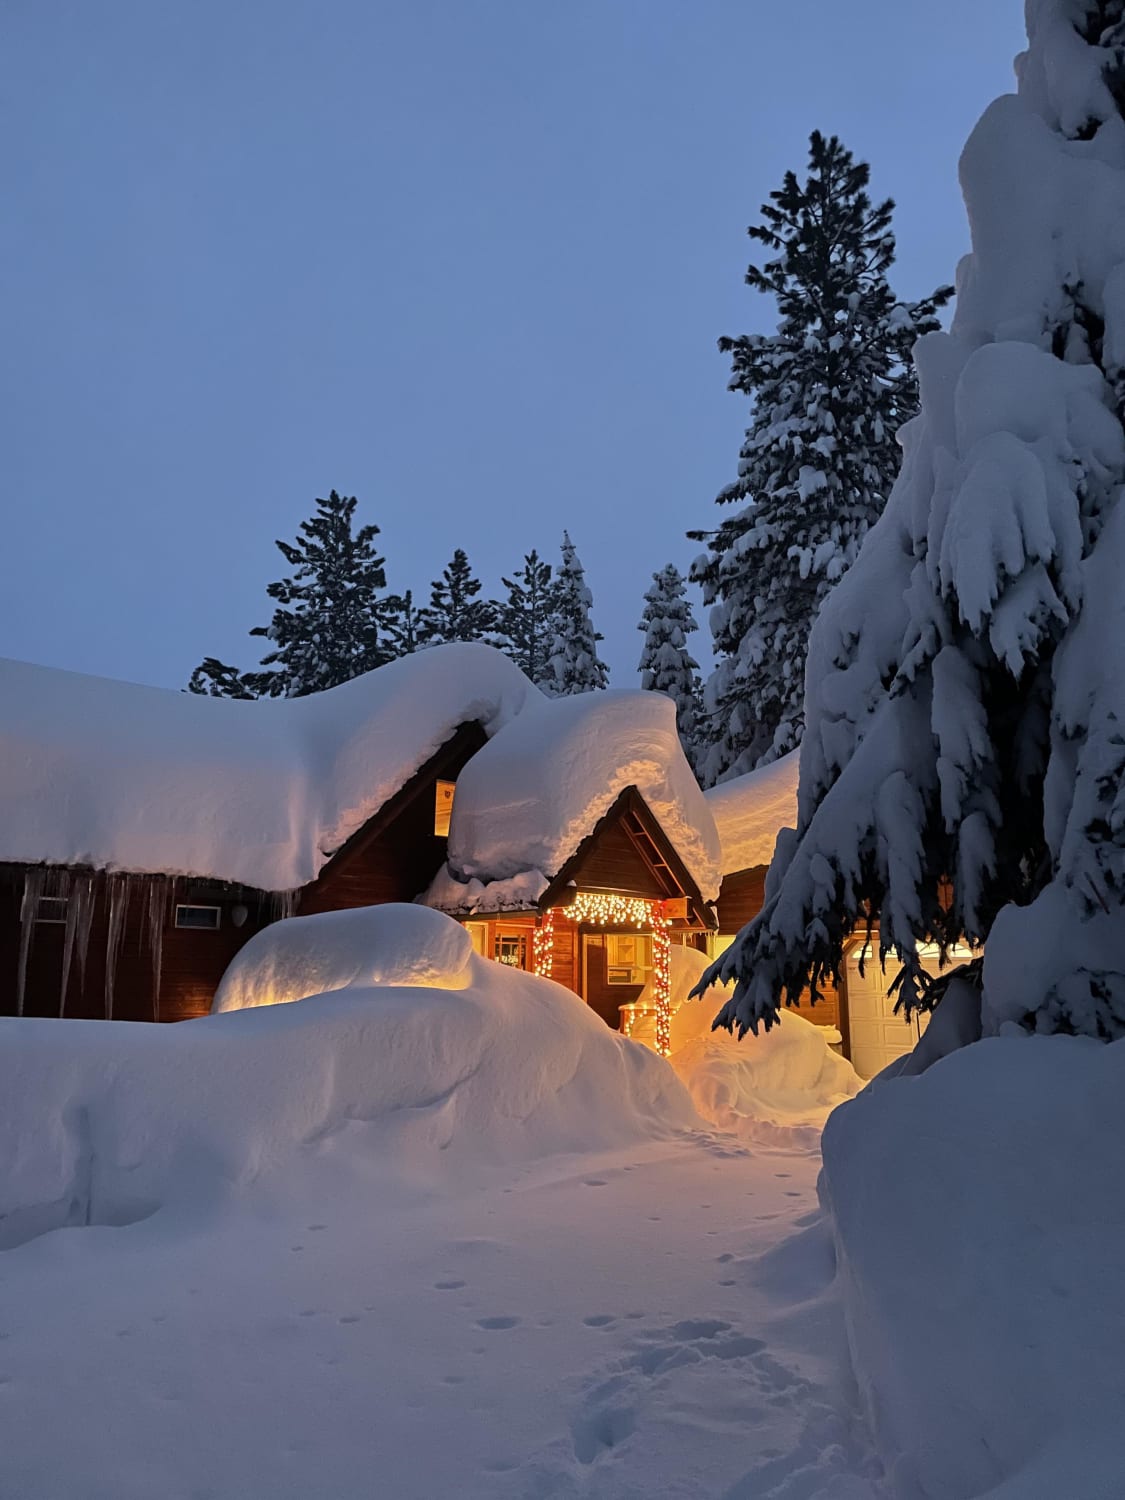 I thought this might fit here - North Lake Tahoe after last winter storm